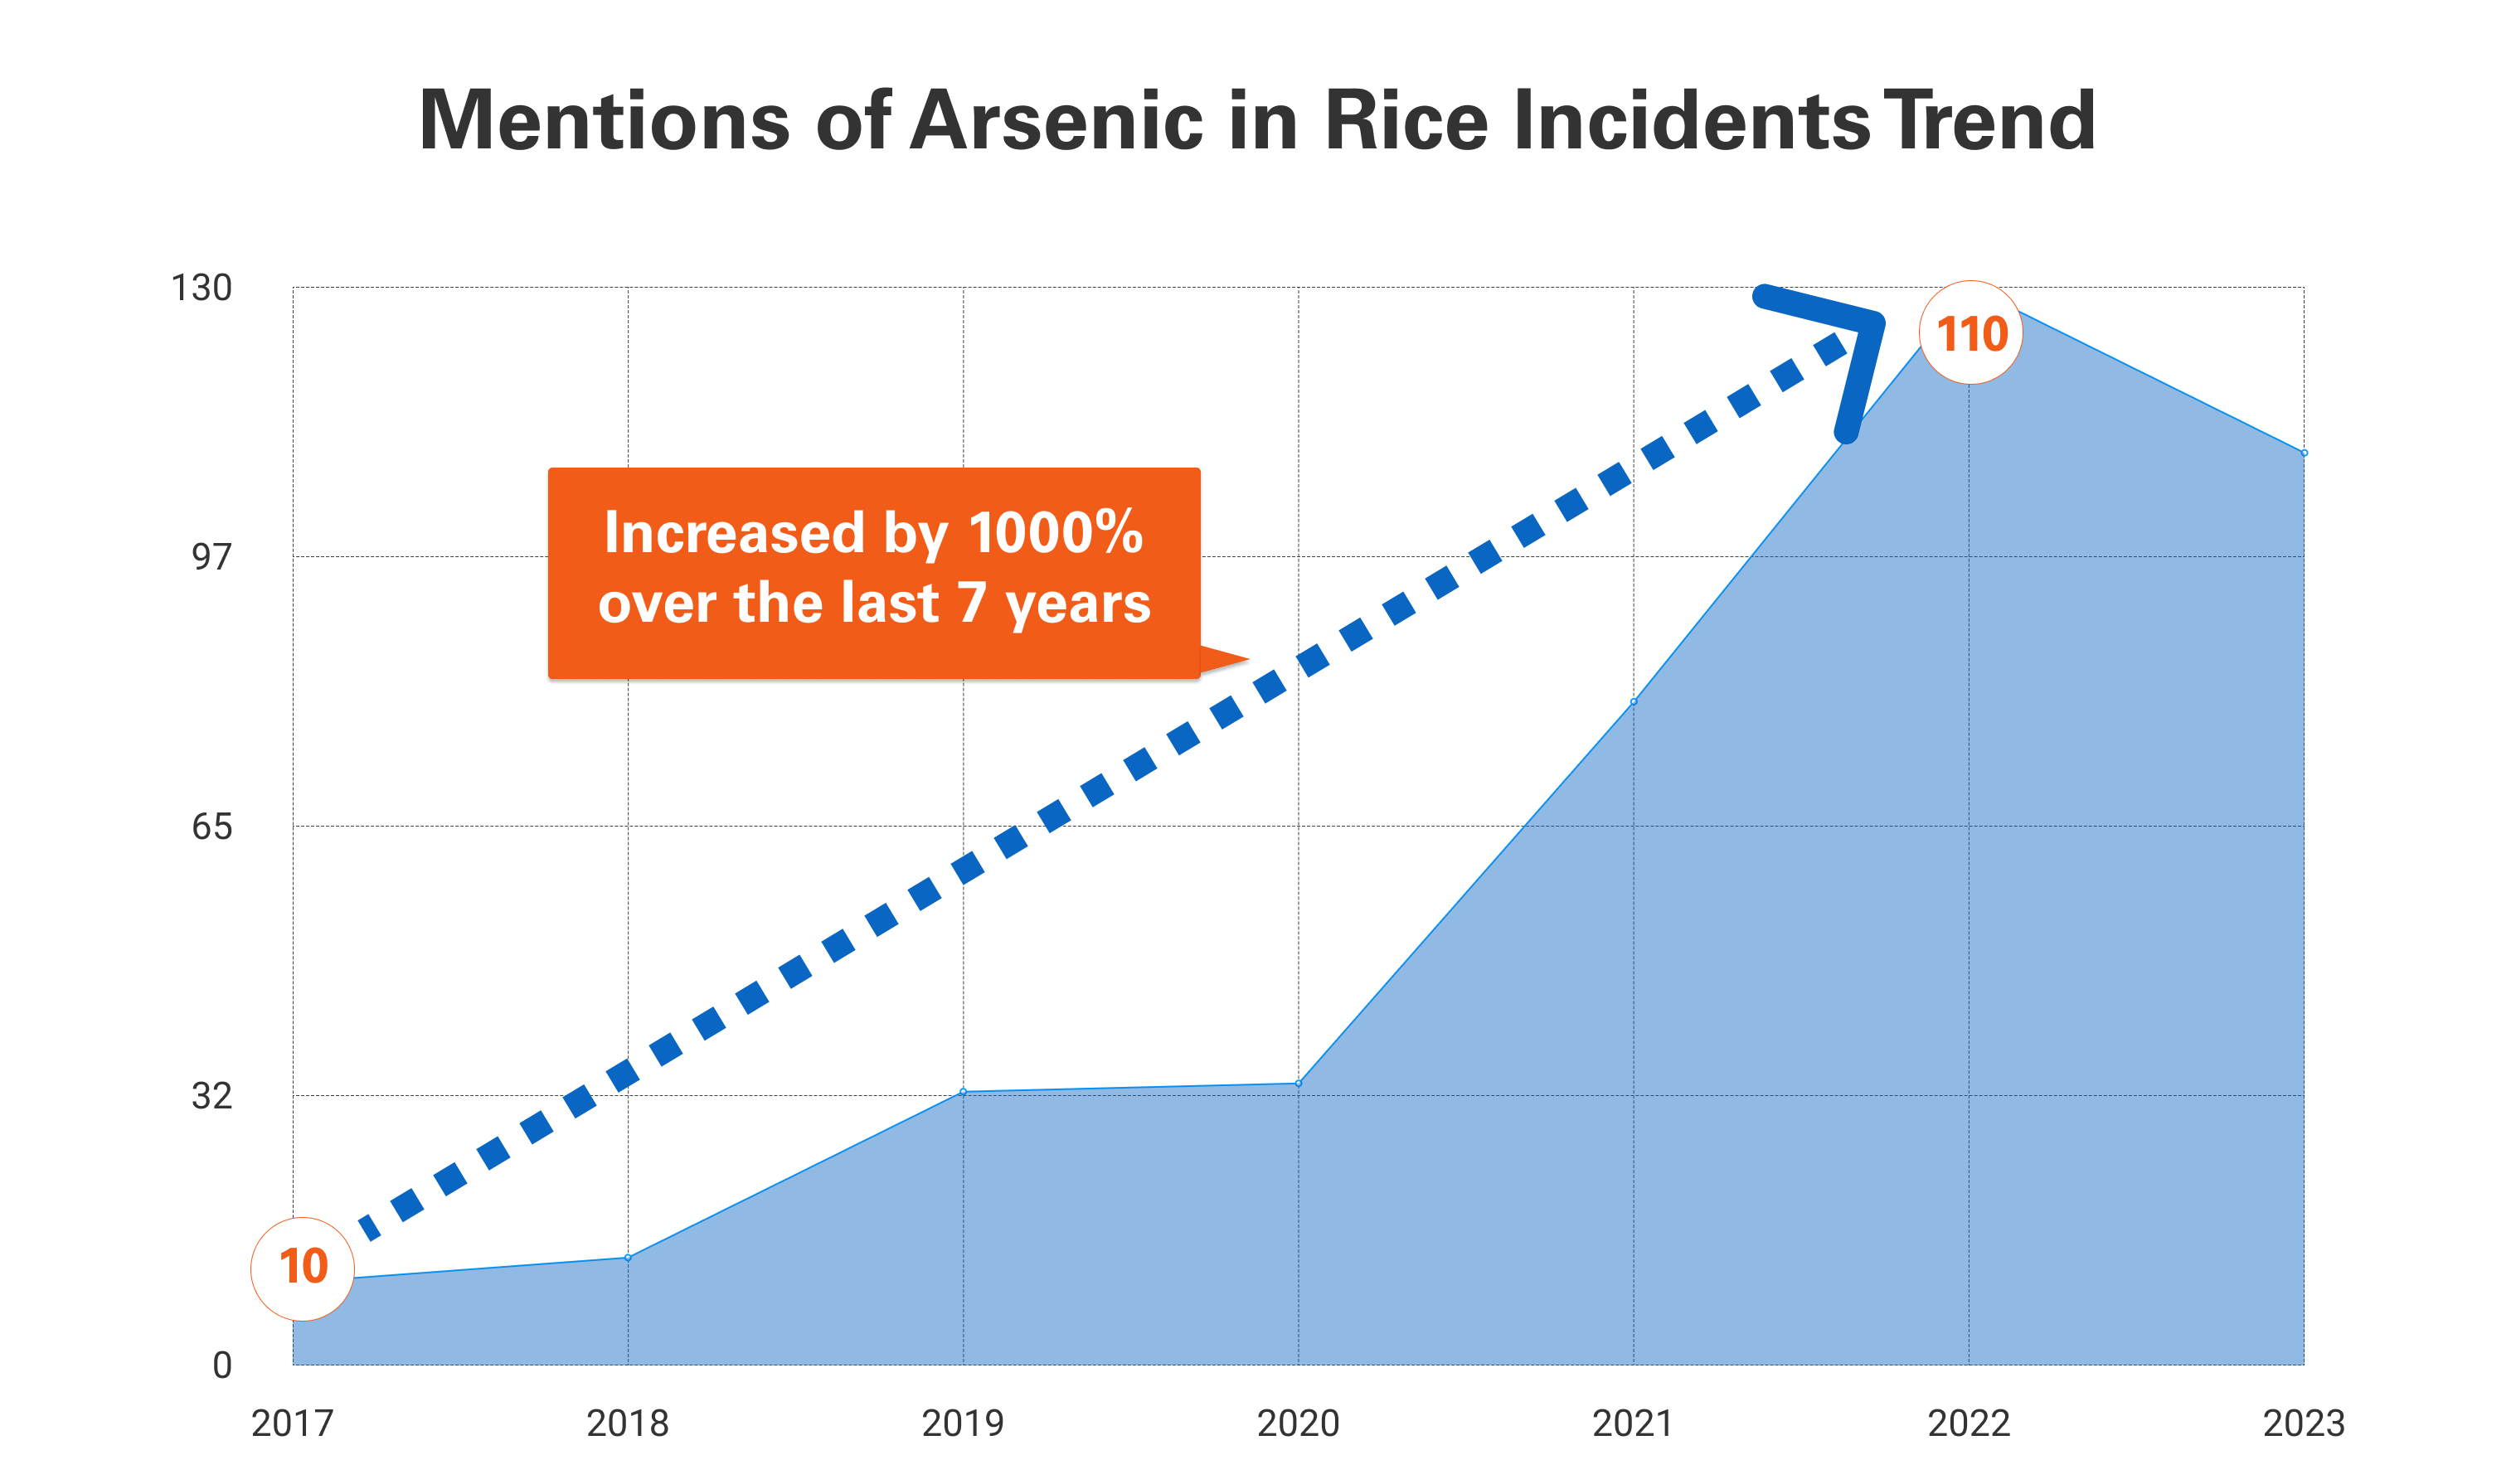 Mentions of Arsenic in Rice Incidents Trend